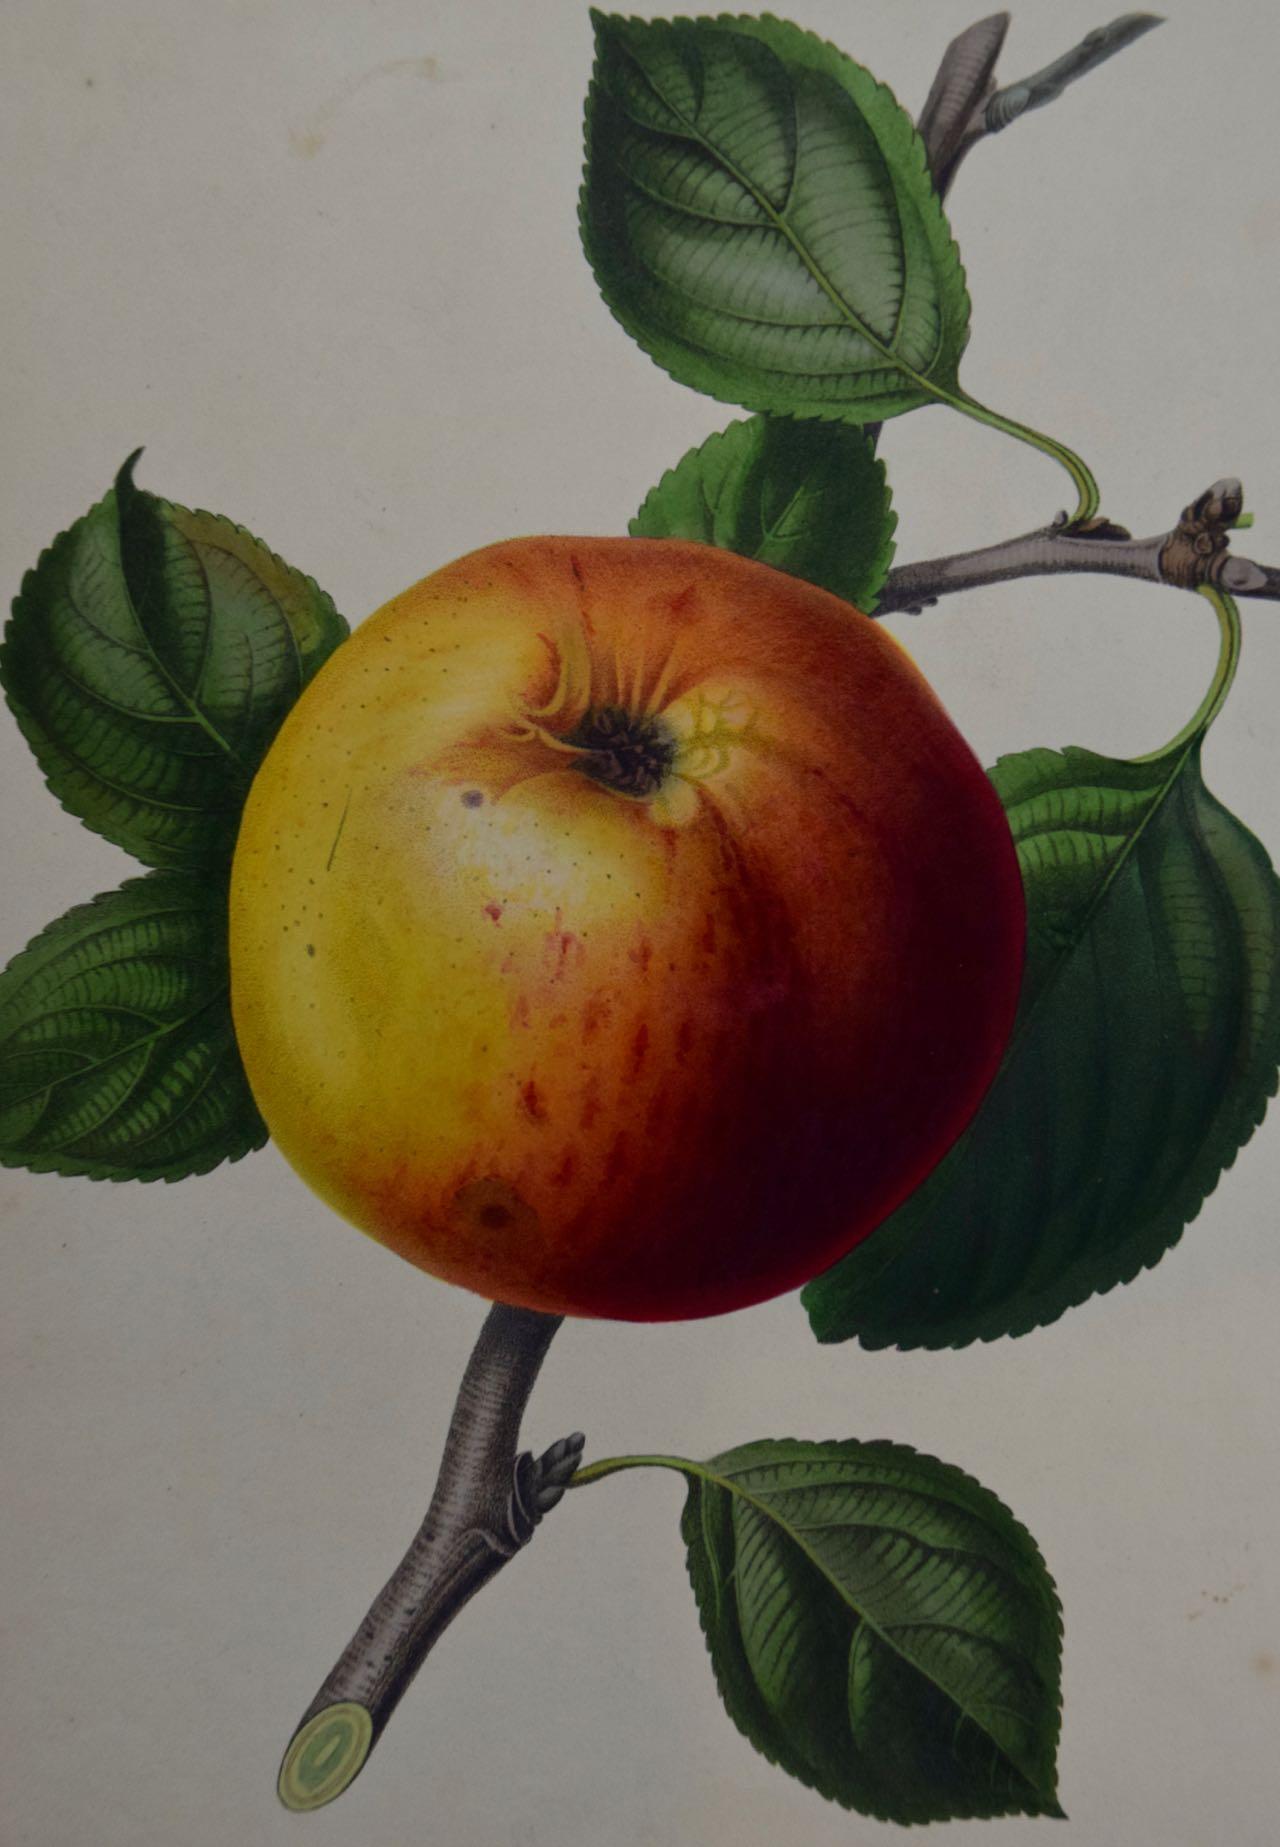 This early 19th century hand-colored stipple engraving by Augusta Innes Withers entitled 